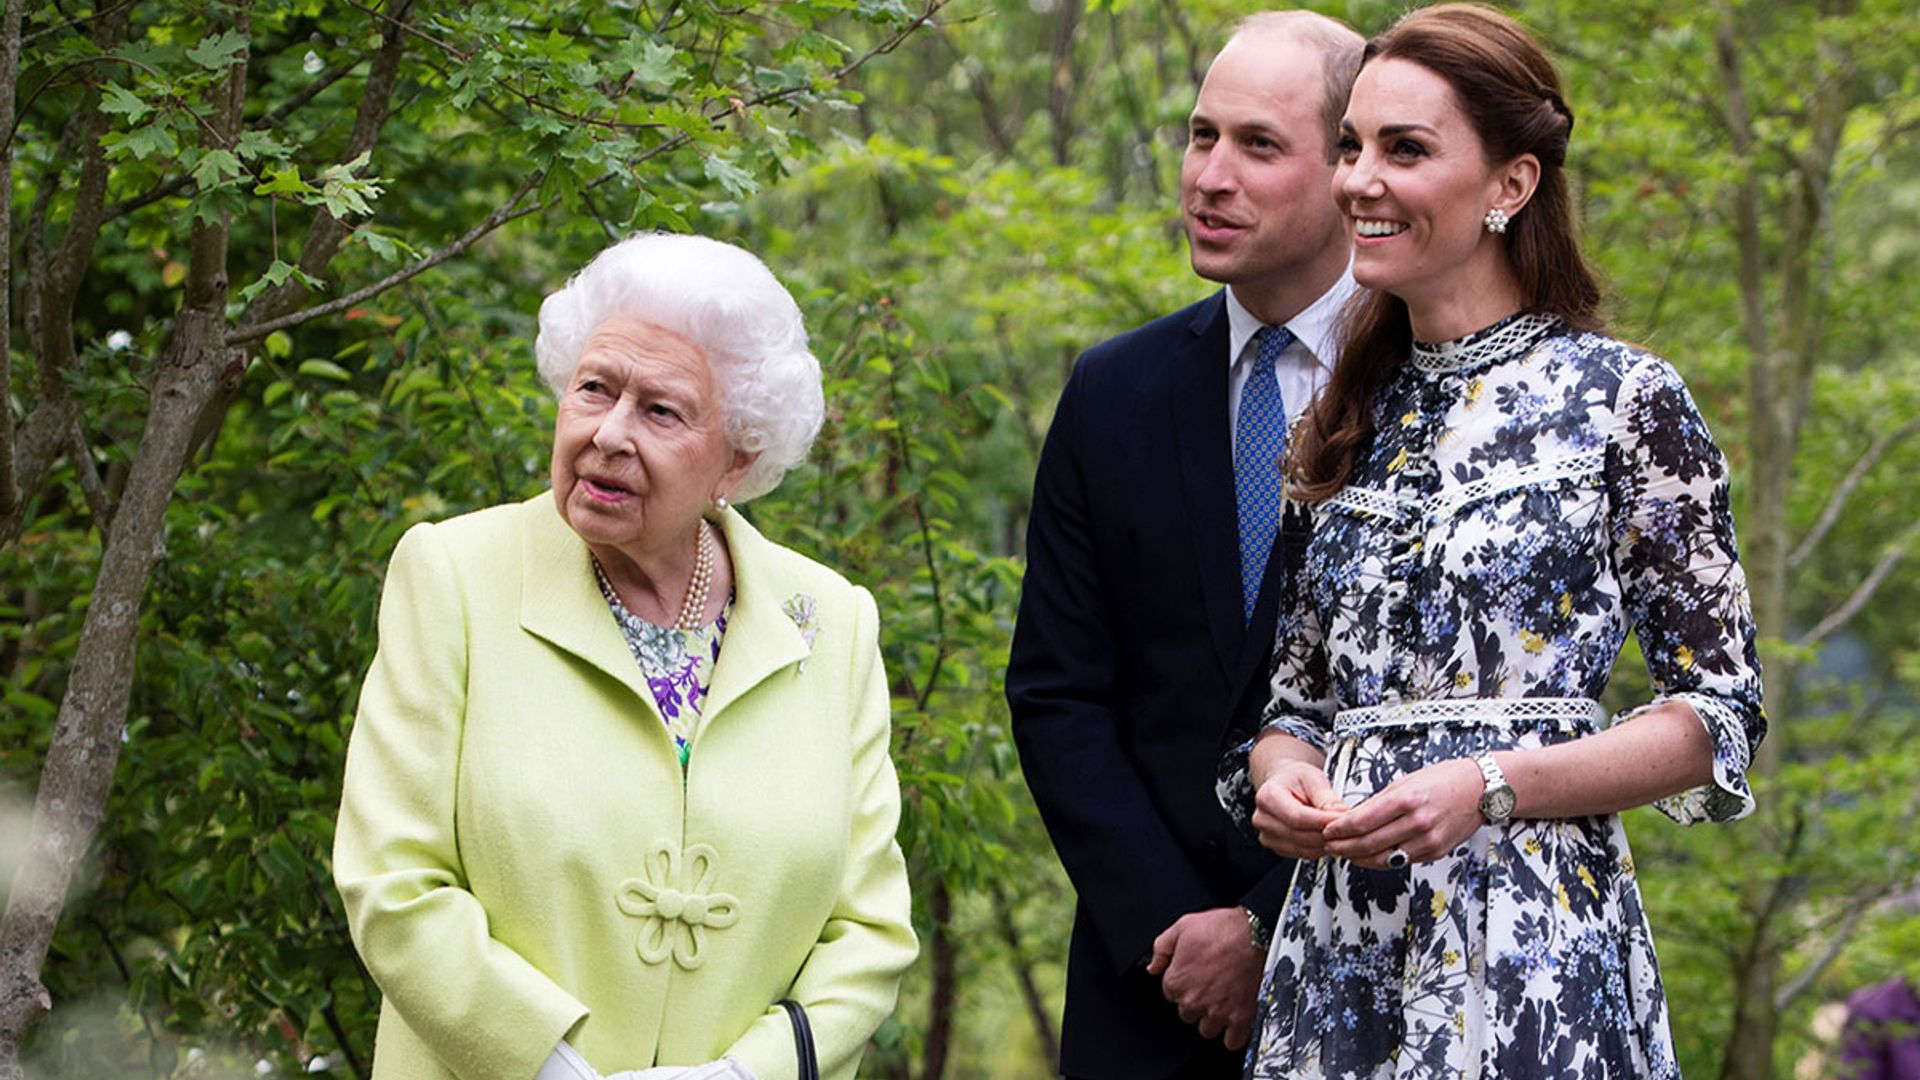 10 beautiful photos of the royals at the Chelsea Flower Show